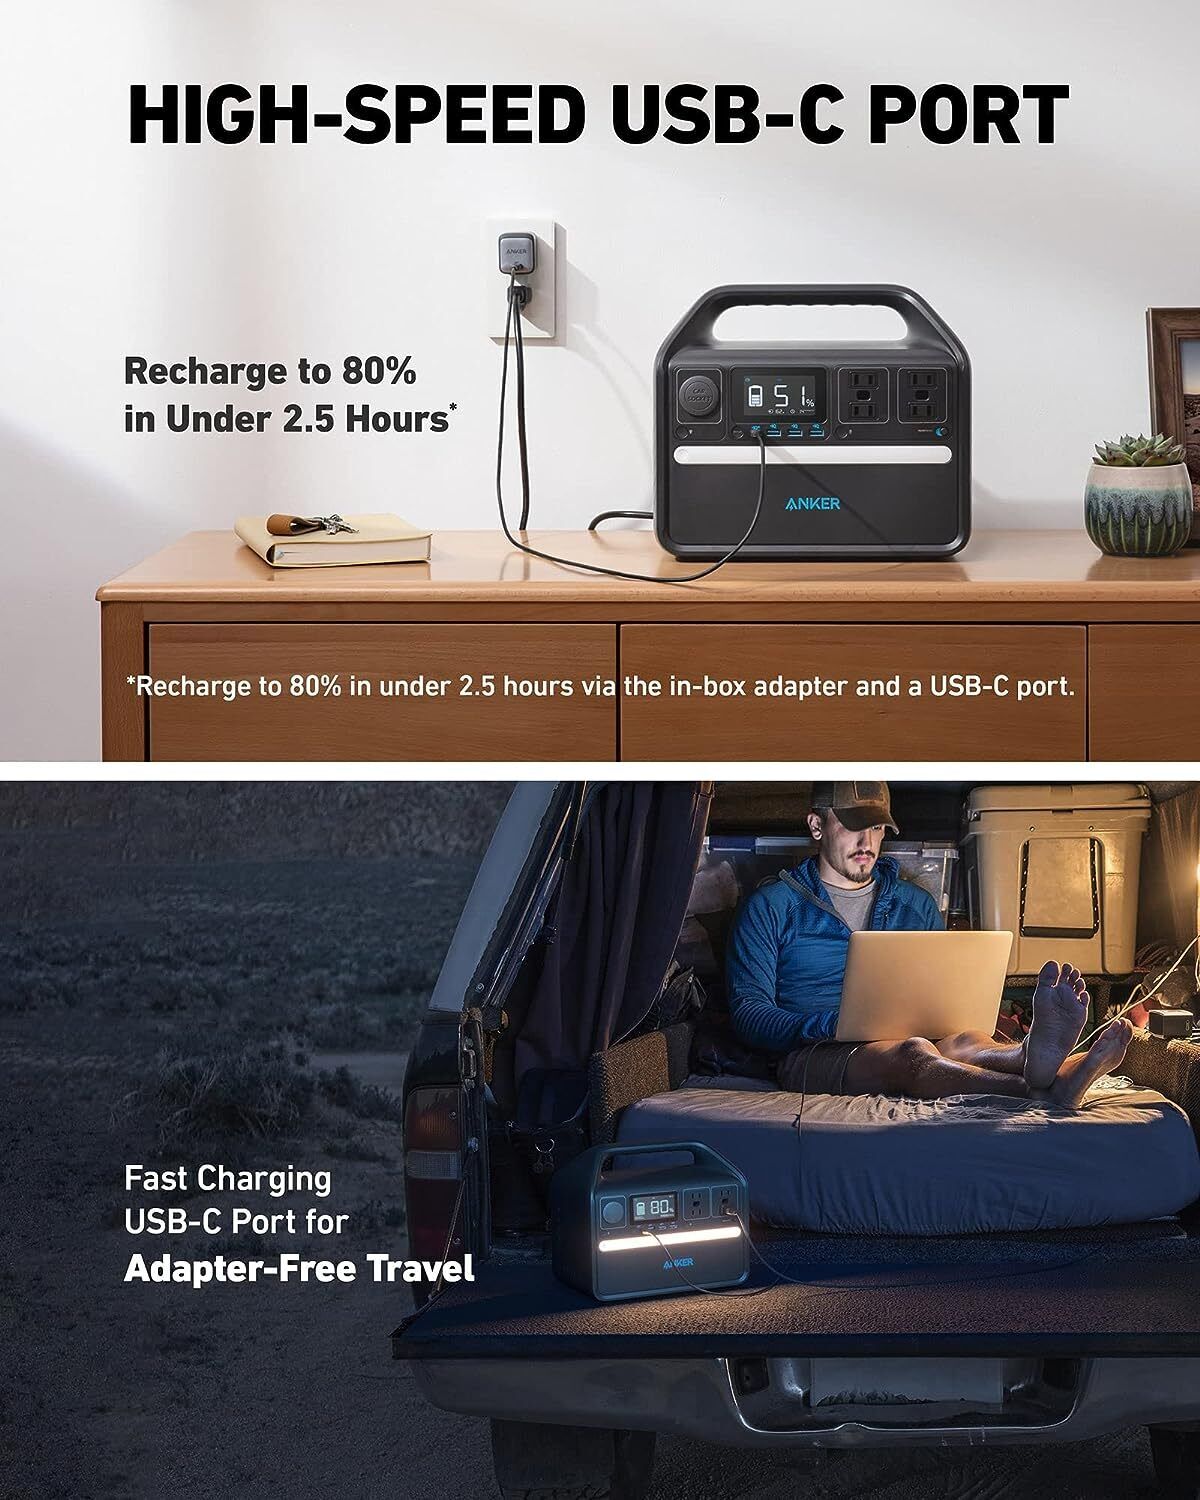 Anker Play Anker 535 Portable Power Station 512Wh Outdoor Solar Generator 500W 9Port Charge